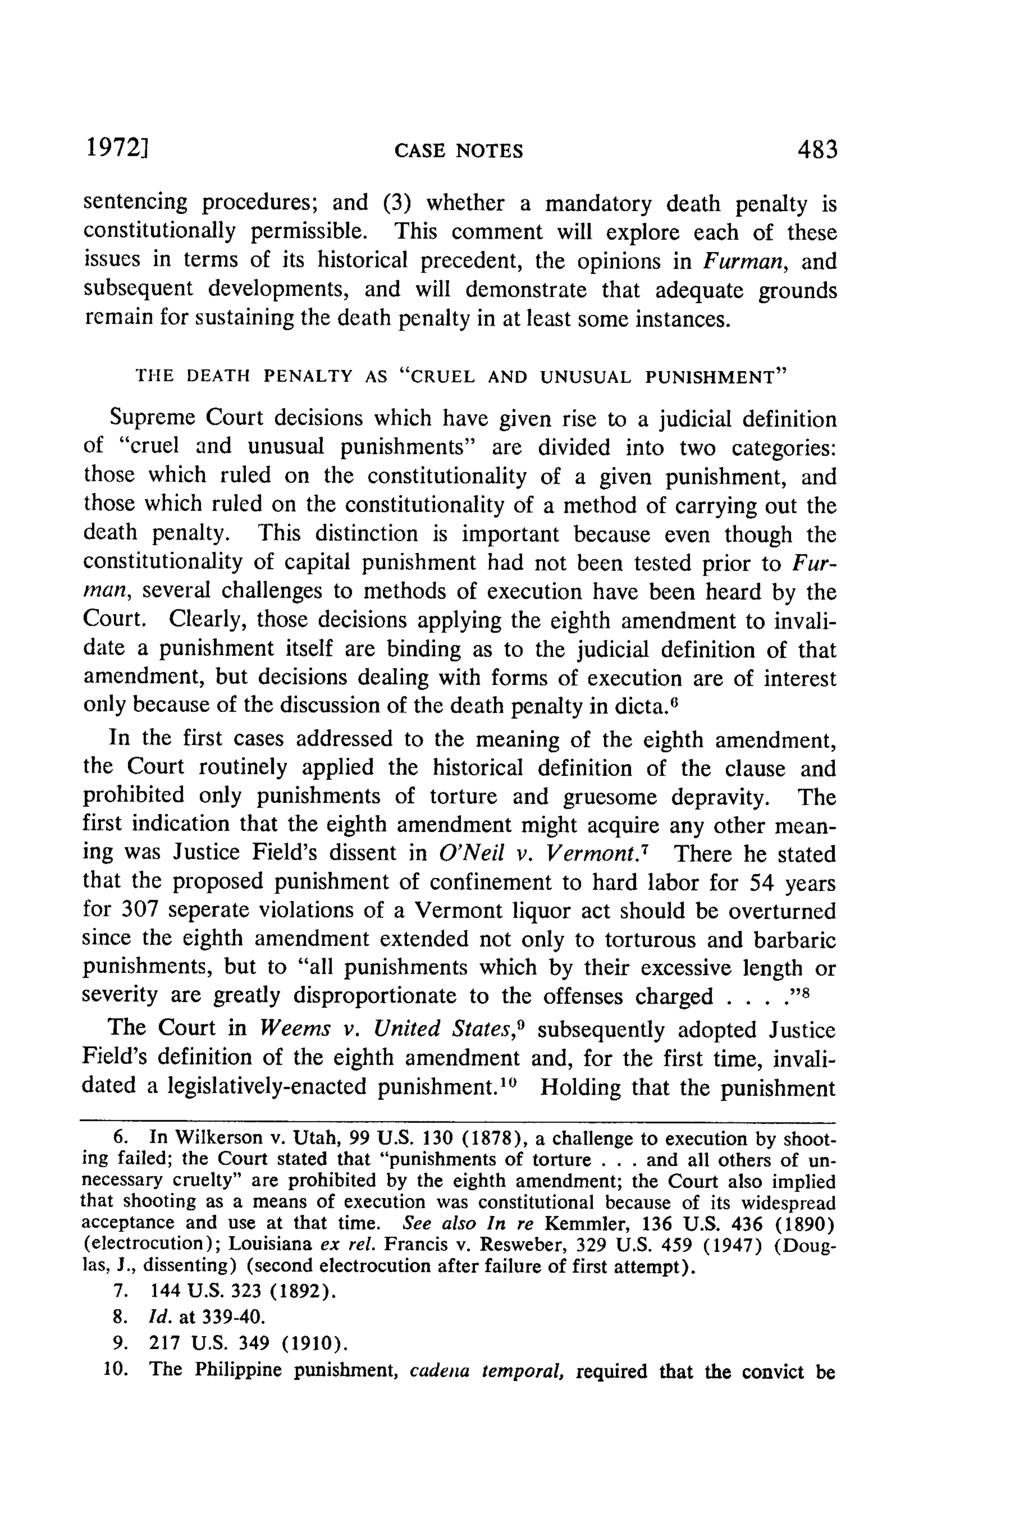 19721 CASE NOTES 483 sentencing procedures; and (3) whether a mandatory death penalty is constitutionally permissible.